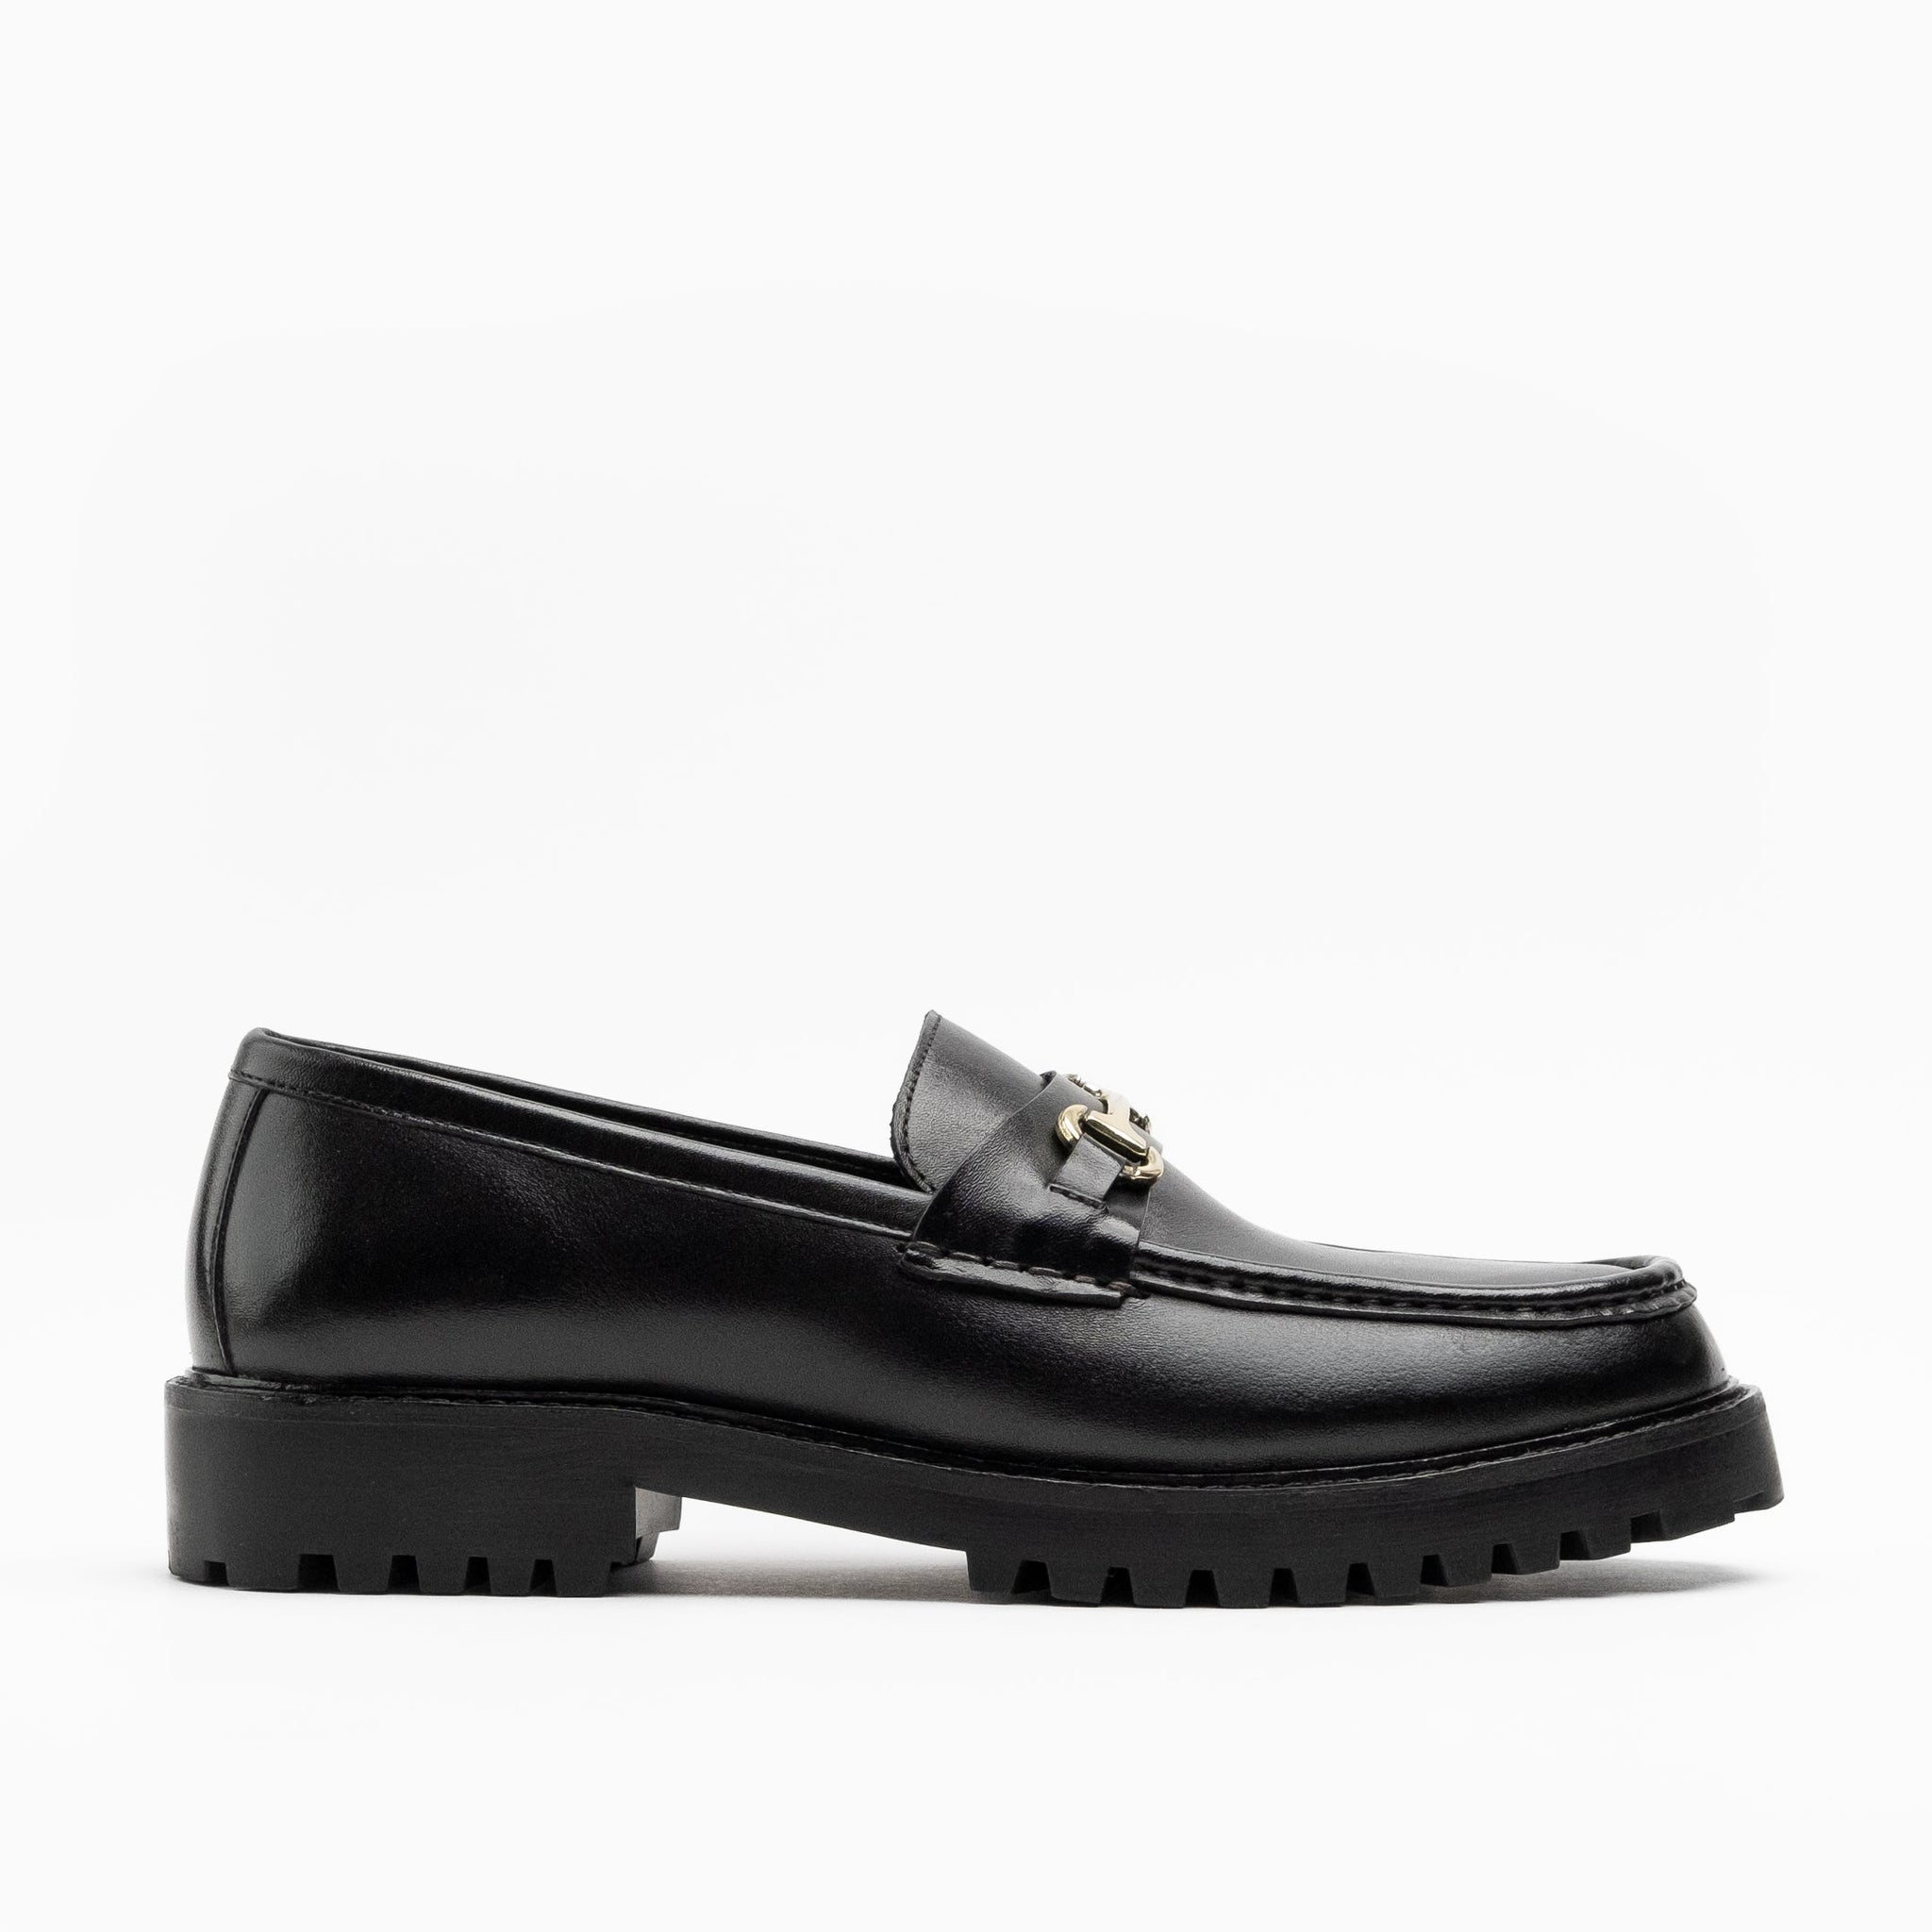 Walk London Sean Trim Loafers | Black Leather | Official Site